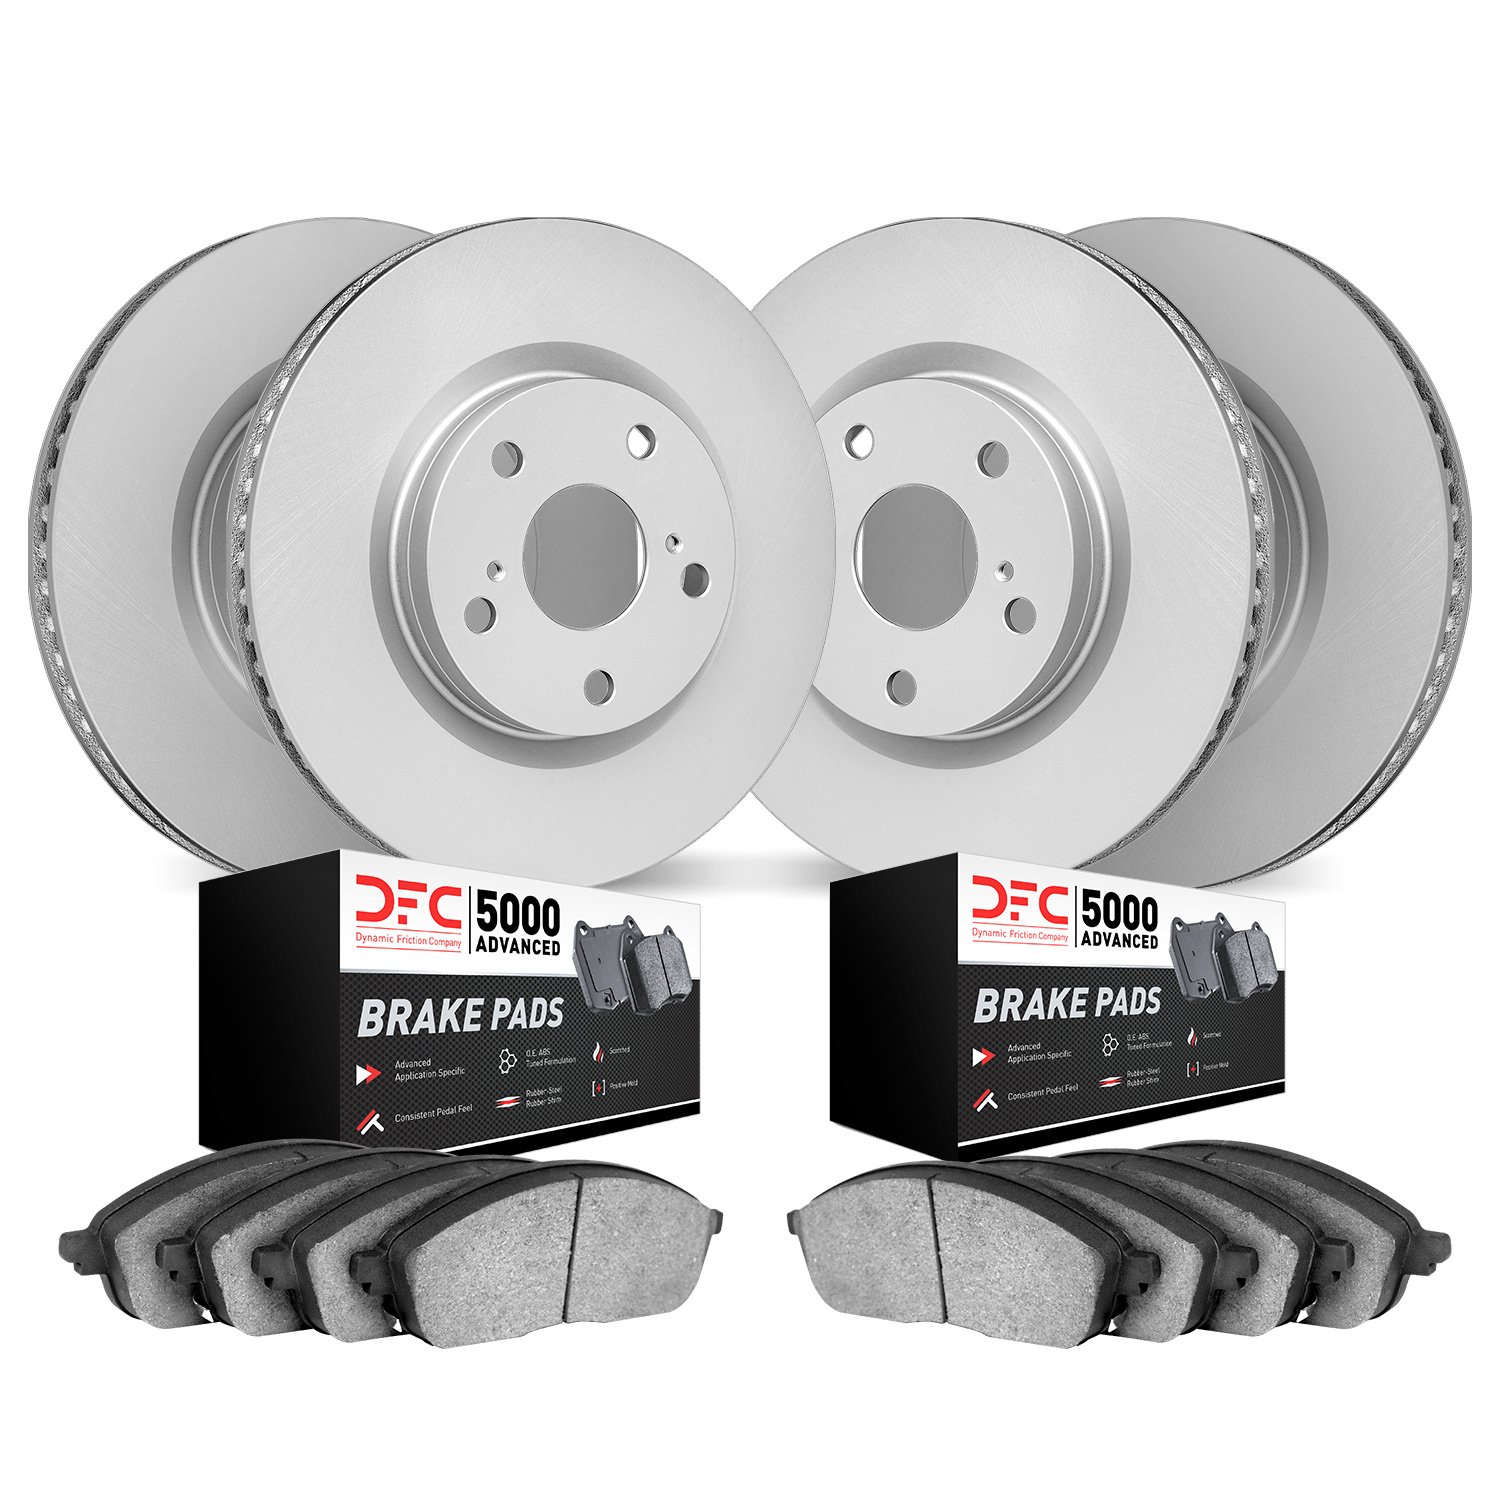 4504-54140 Geospec Brake Rotors w/5000 Advanced Brake Pads Kit, Fits Select Ford/Lincoln/Mercury/Mazda, Position: Front and Rear